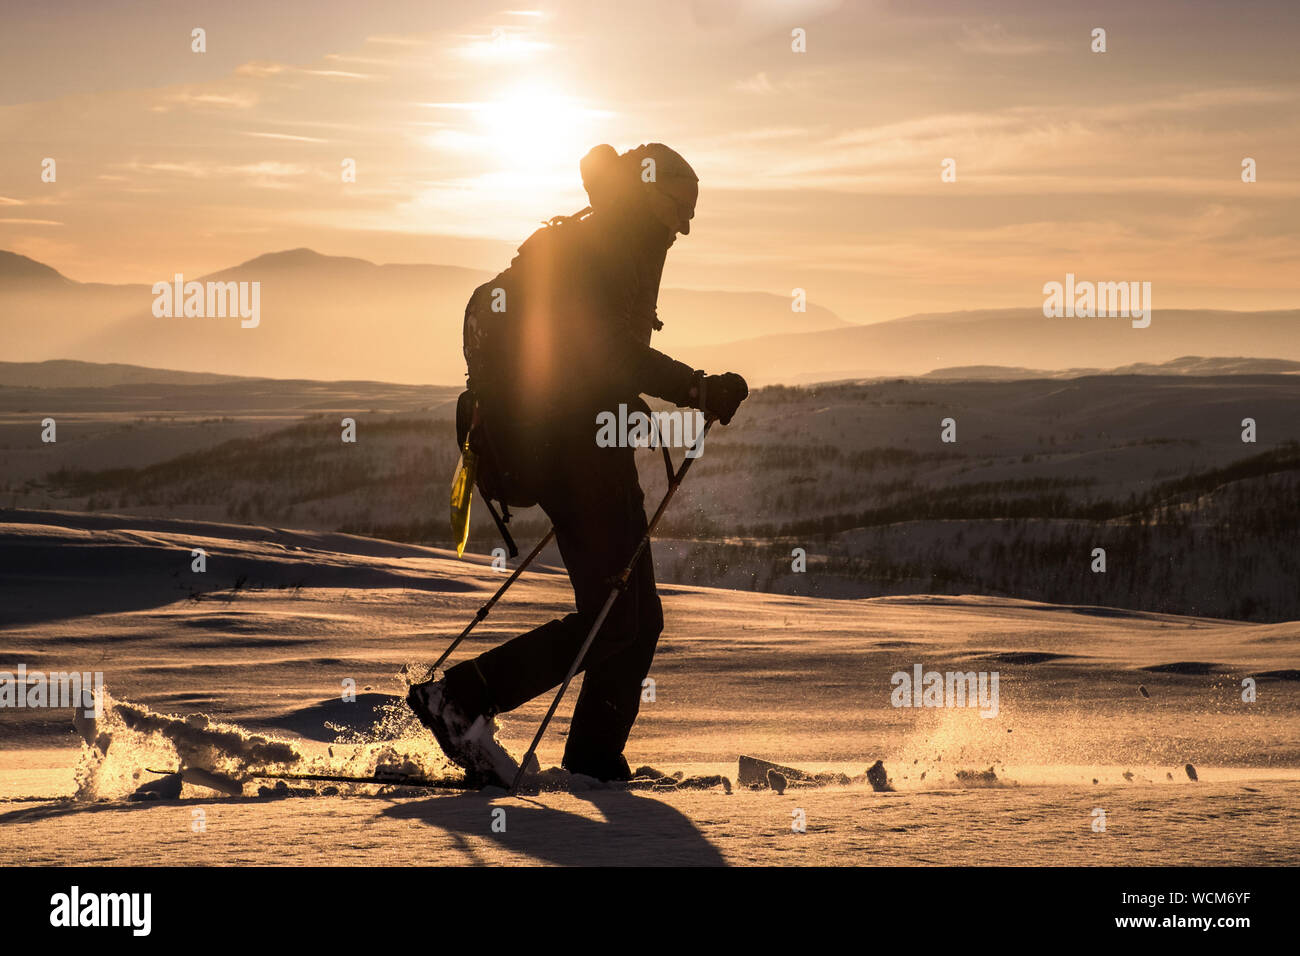 Ski tourer / cross country skier / back country skier silhouetted against the setting sun in the mountains of Norway Stock Photo